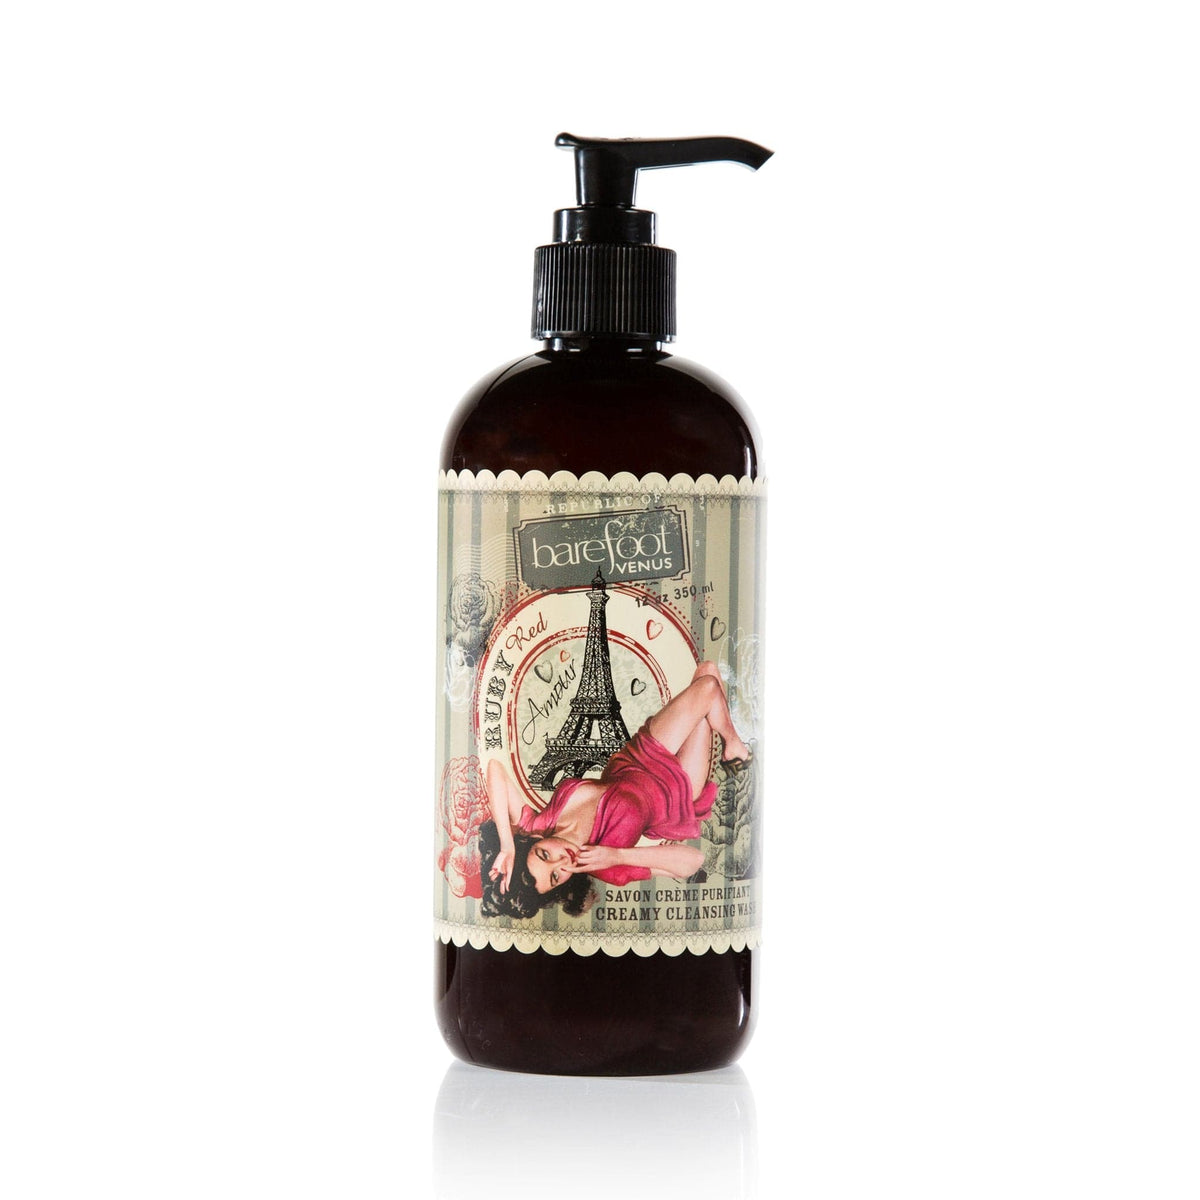 Ruby Red Cleansing Wash GENTLE SKIN CLEANSER. GINKO + BOTANICAL EXTRACT. Barefoot Venus